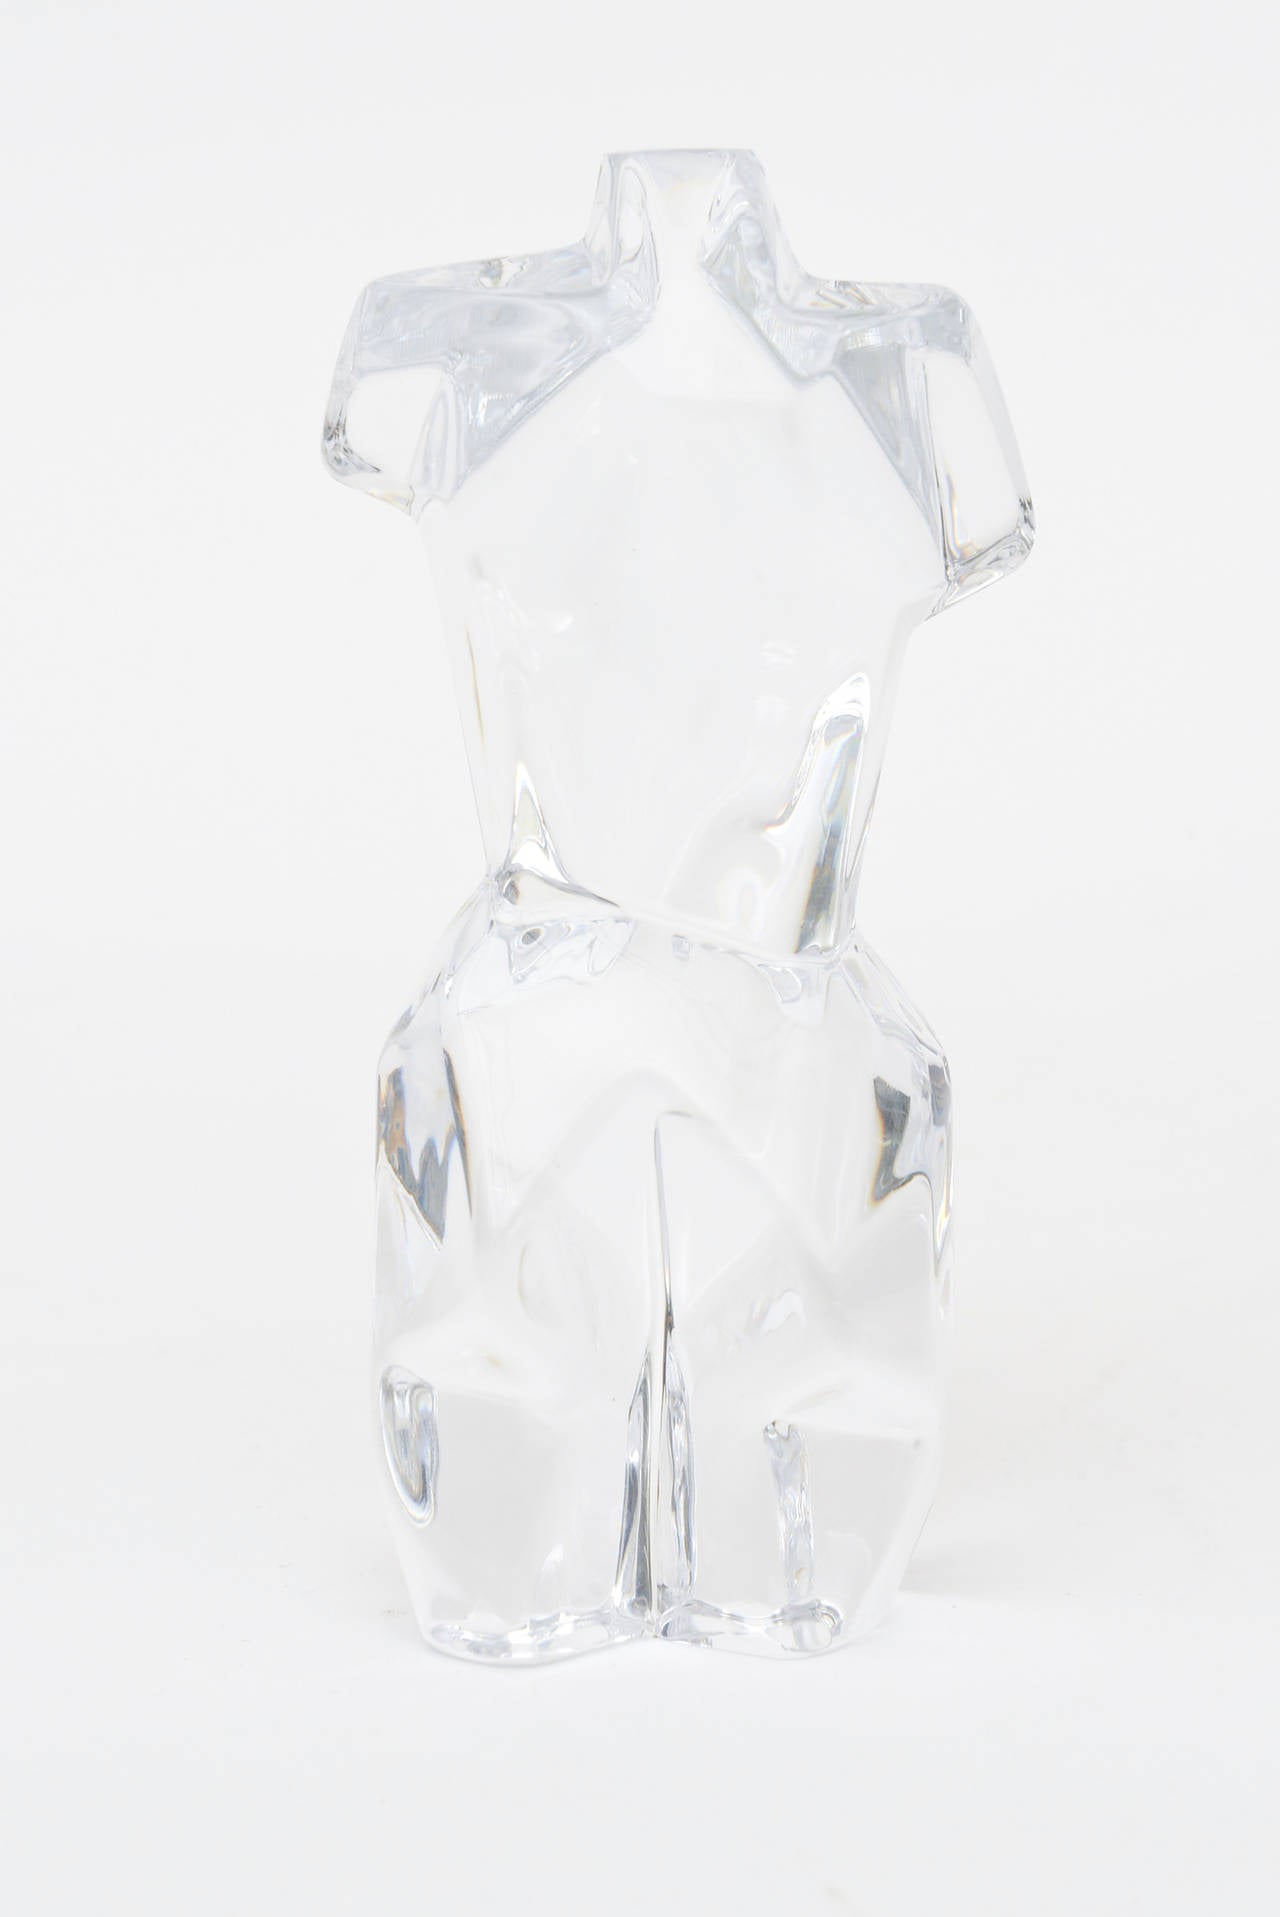 Mid-20th Century French Daum Crystal Glass Cubist Torso Sculpture